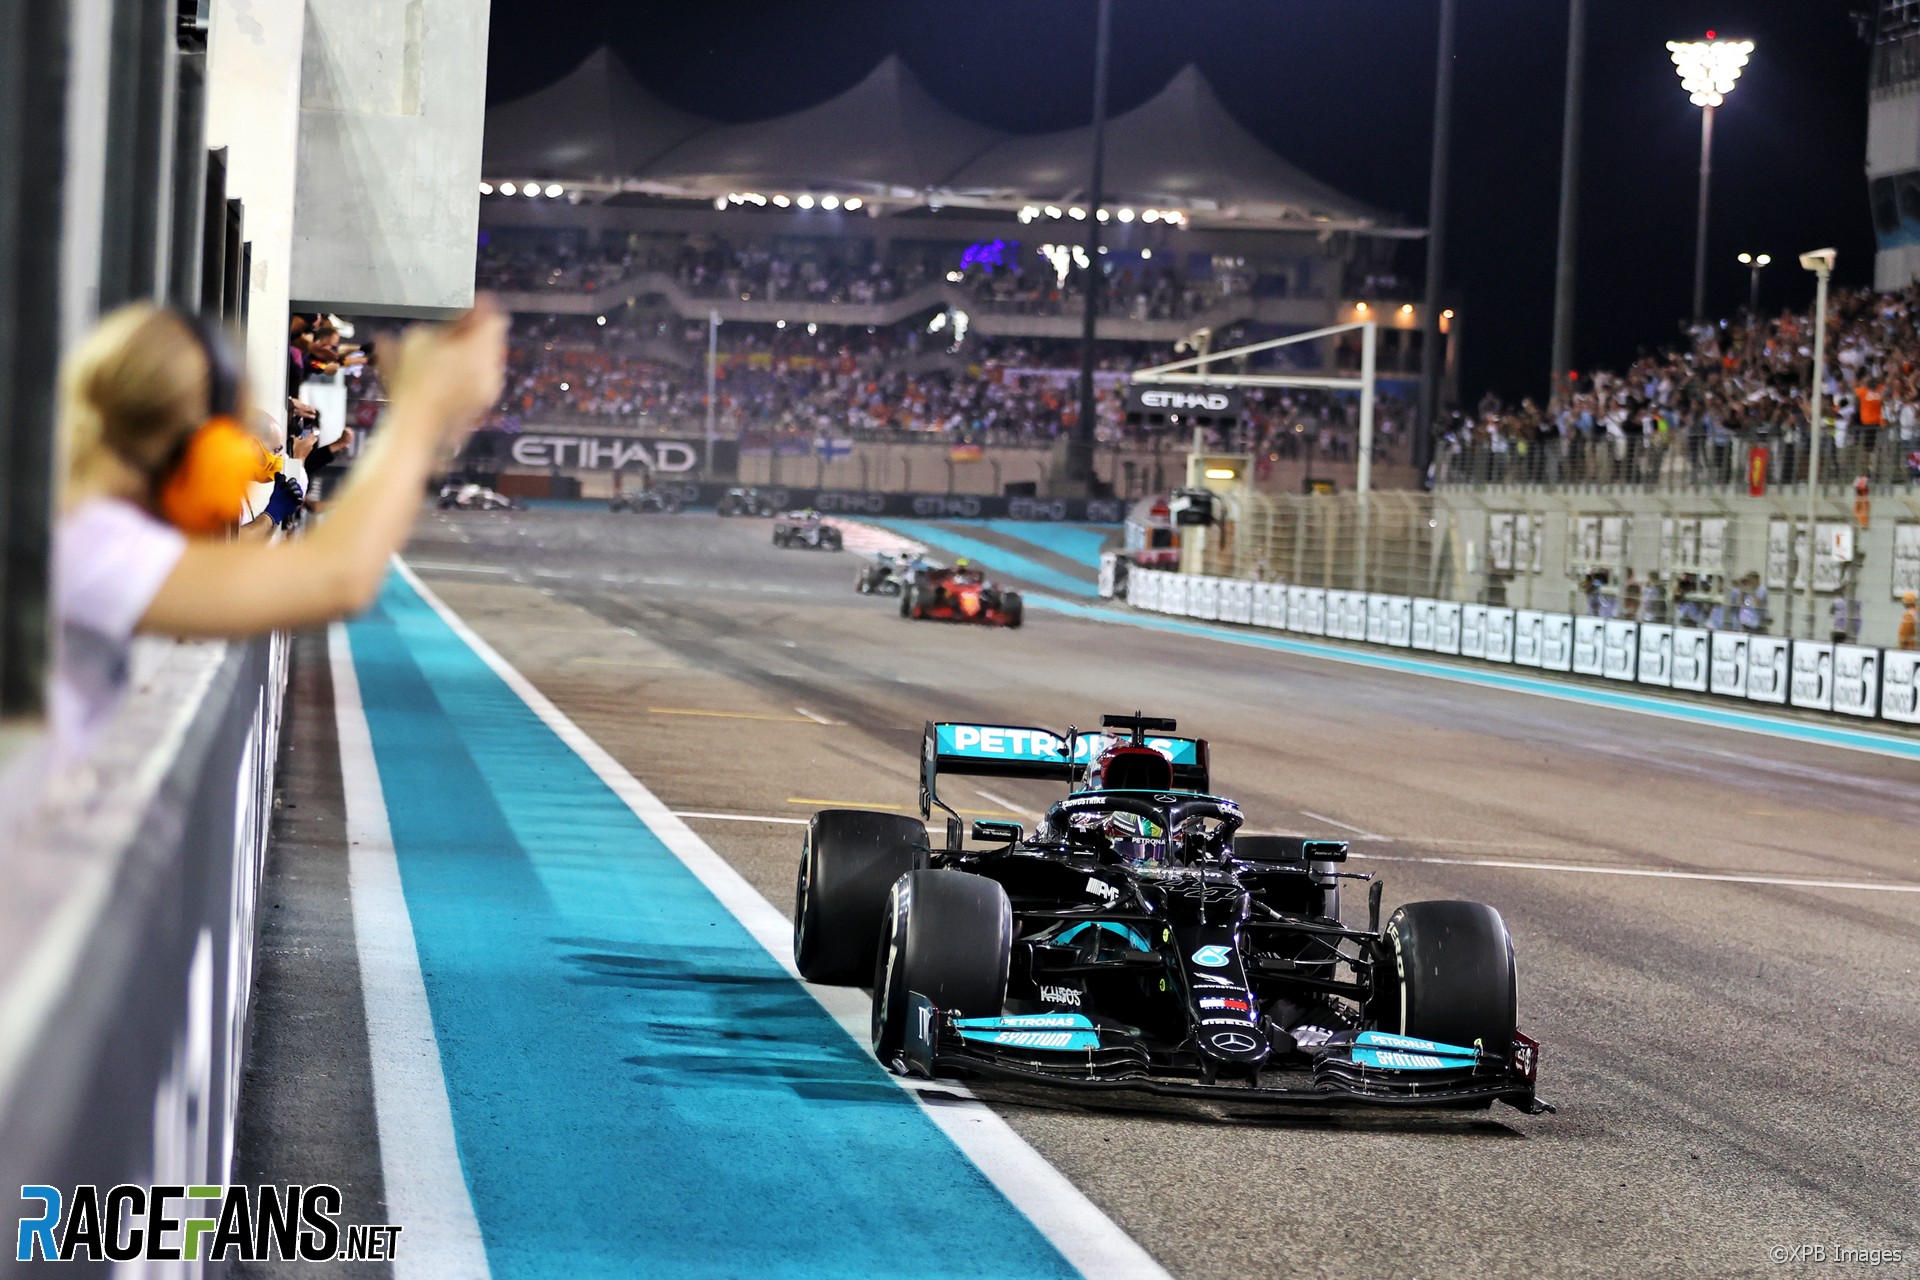 “My worst fears got here alive” in Abu Dhabi finale controversy · RaceFans